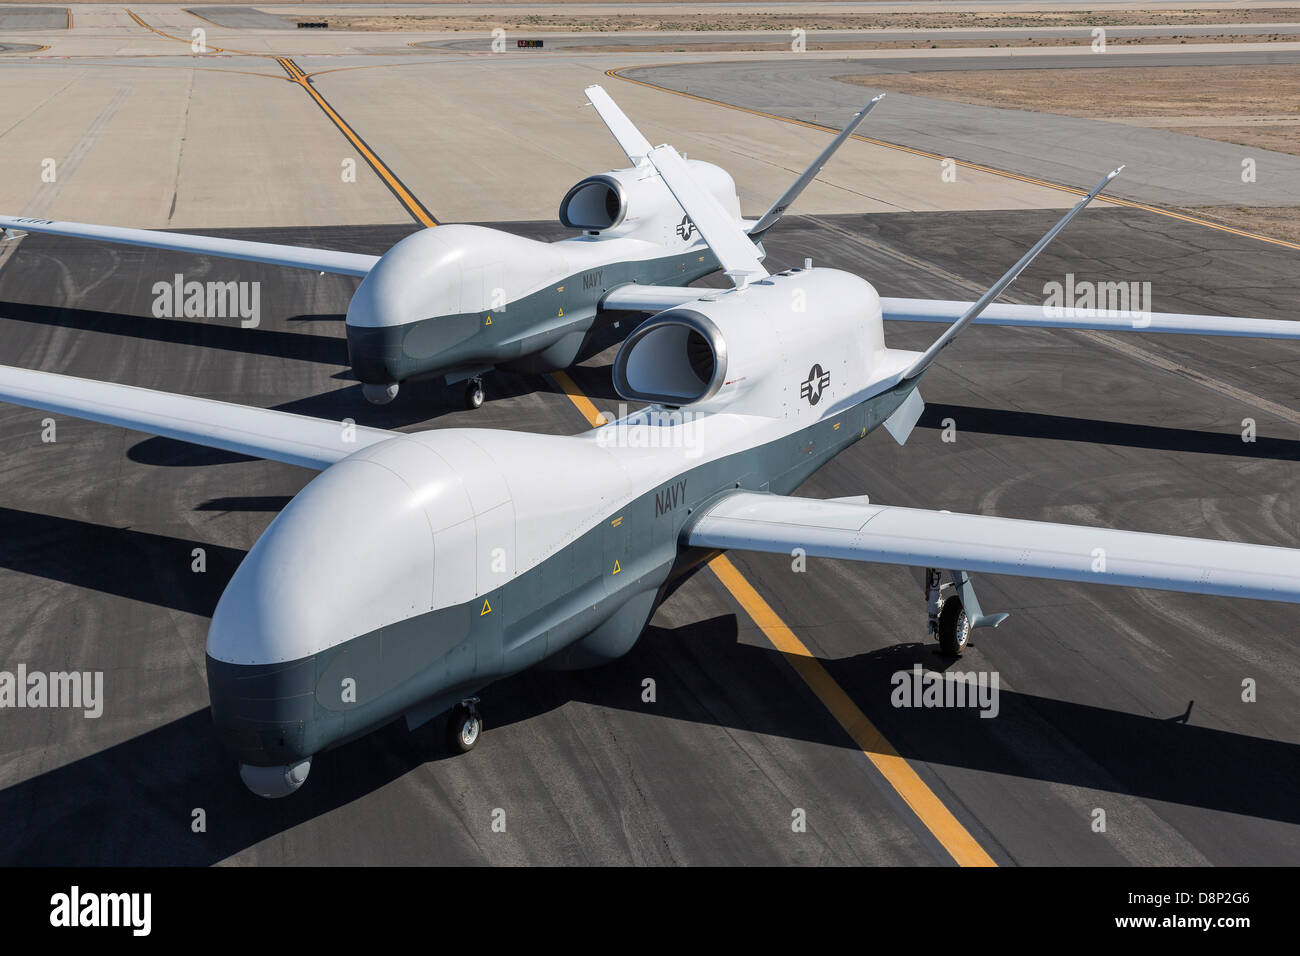 Northrop Grumman MQ-4C Triton unmanned aerial vehicles on the tarmac at a Northrop Grumman test facility April 21, 2013 in Palmdale, CA. The Triton is undergoing flight testing as an unmanned maritime surveillance vehicle. Stock Photo